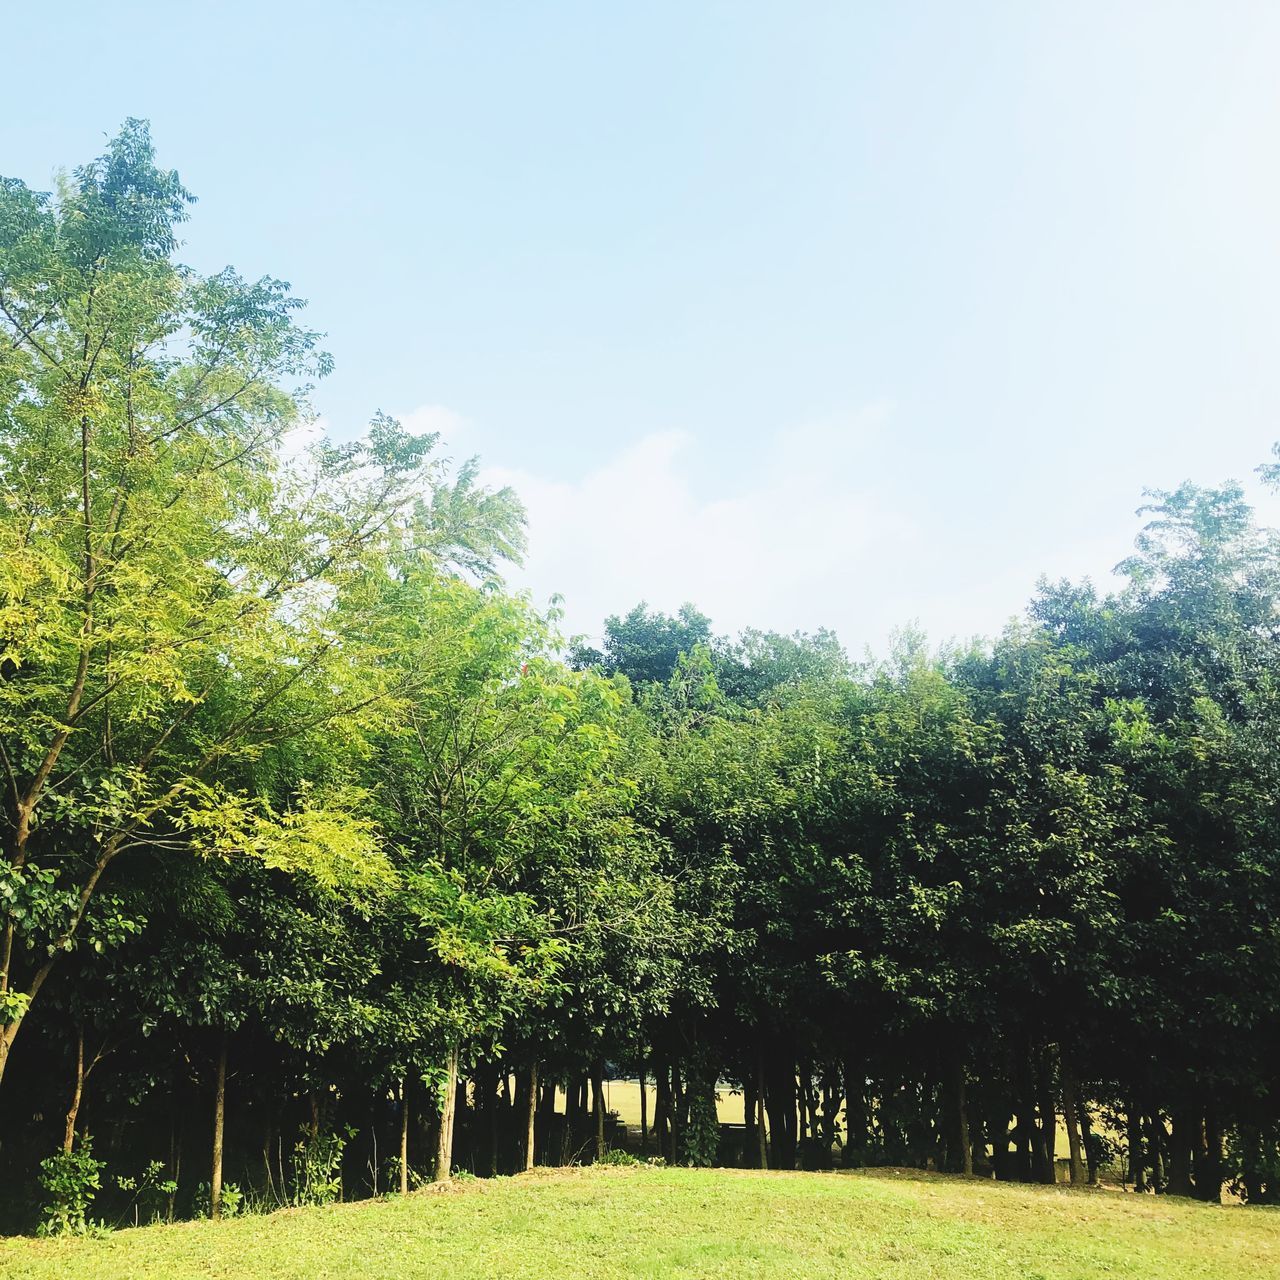 tree, plant, sky, nature, growth, beauty in nature, green color, tranquility, land, day, no people, park, outdoors, environment, sunlight, grass, forest, landscape, green, tranquil scene, leaves